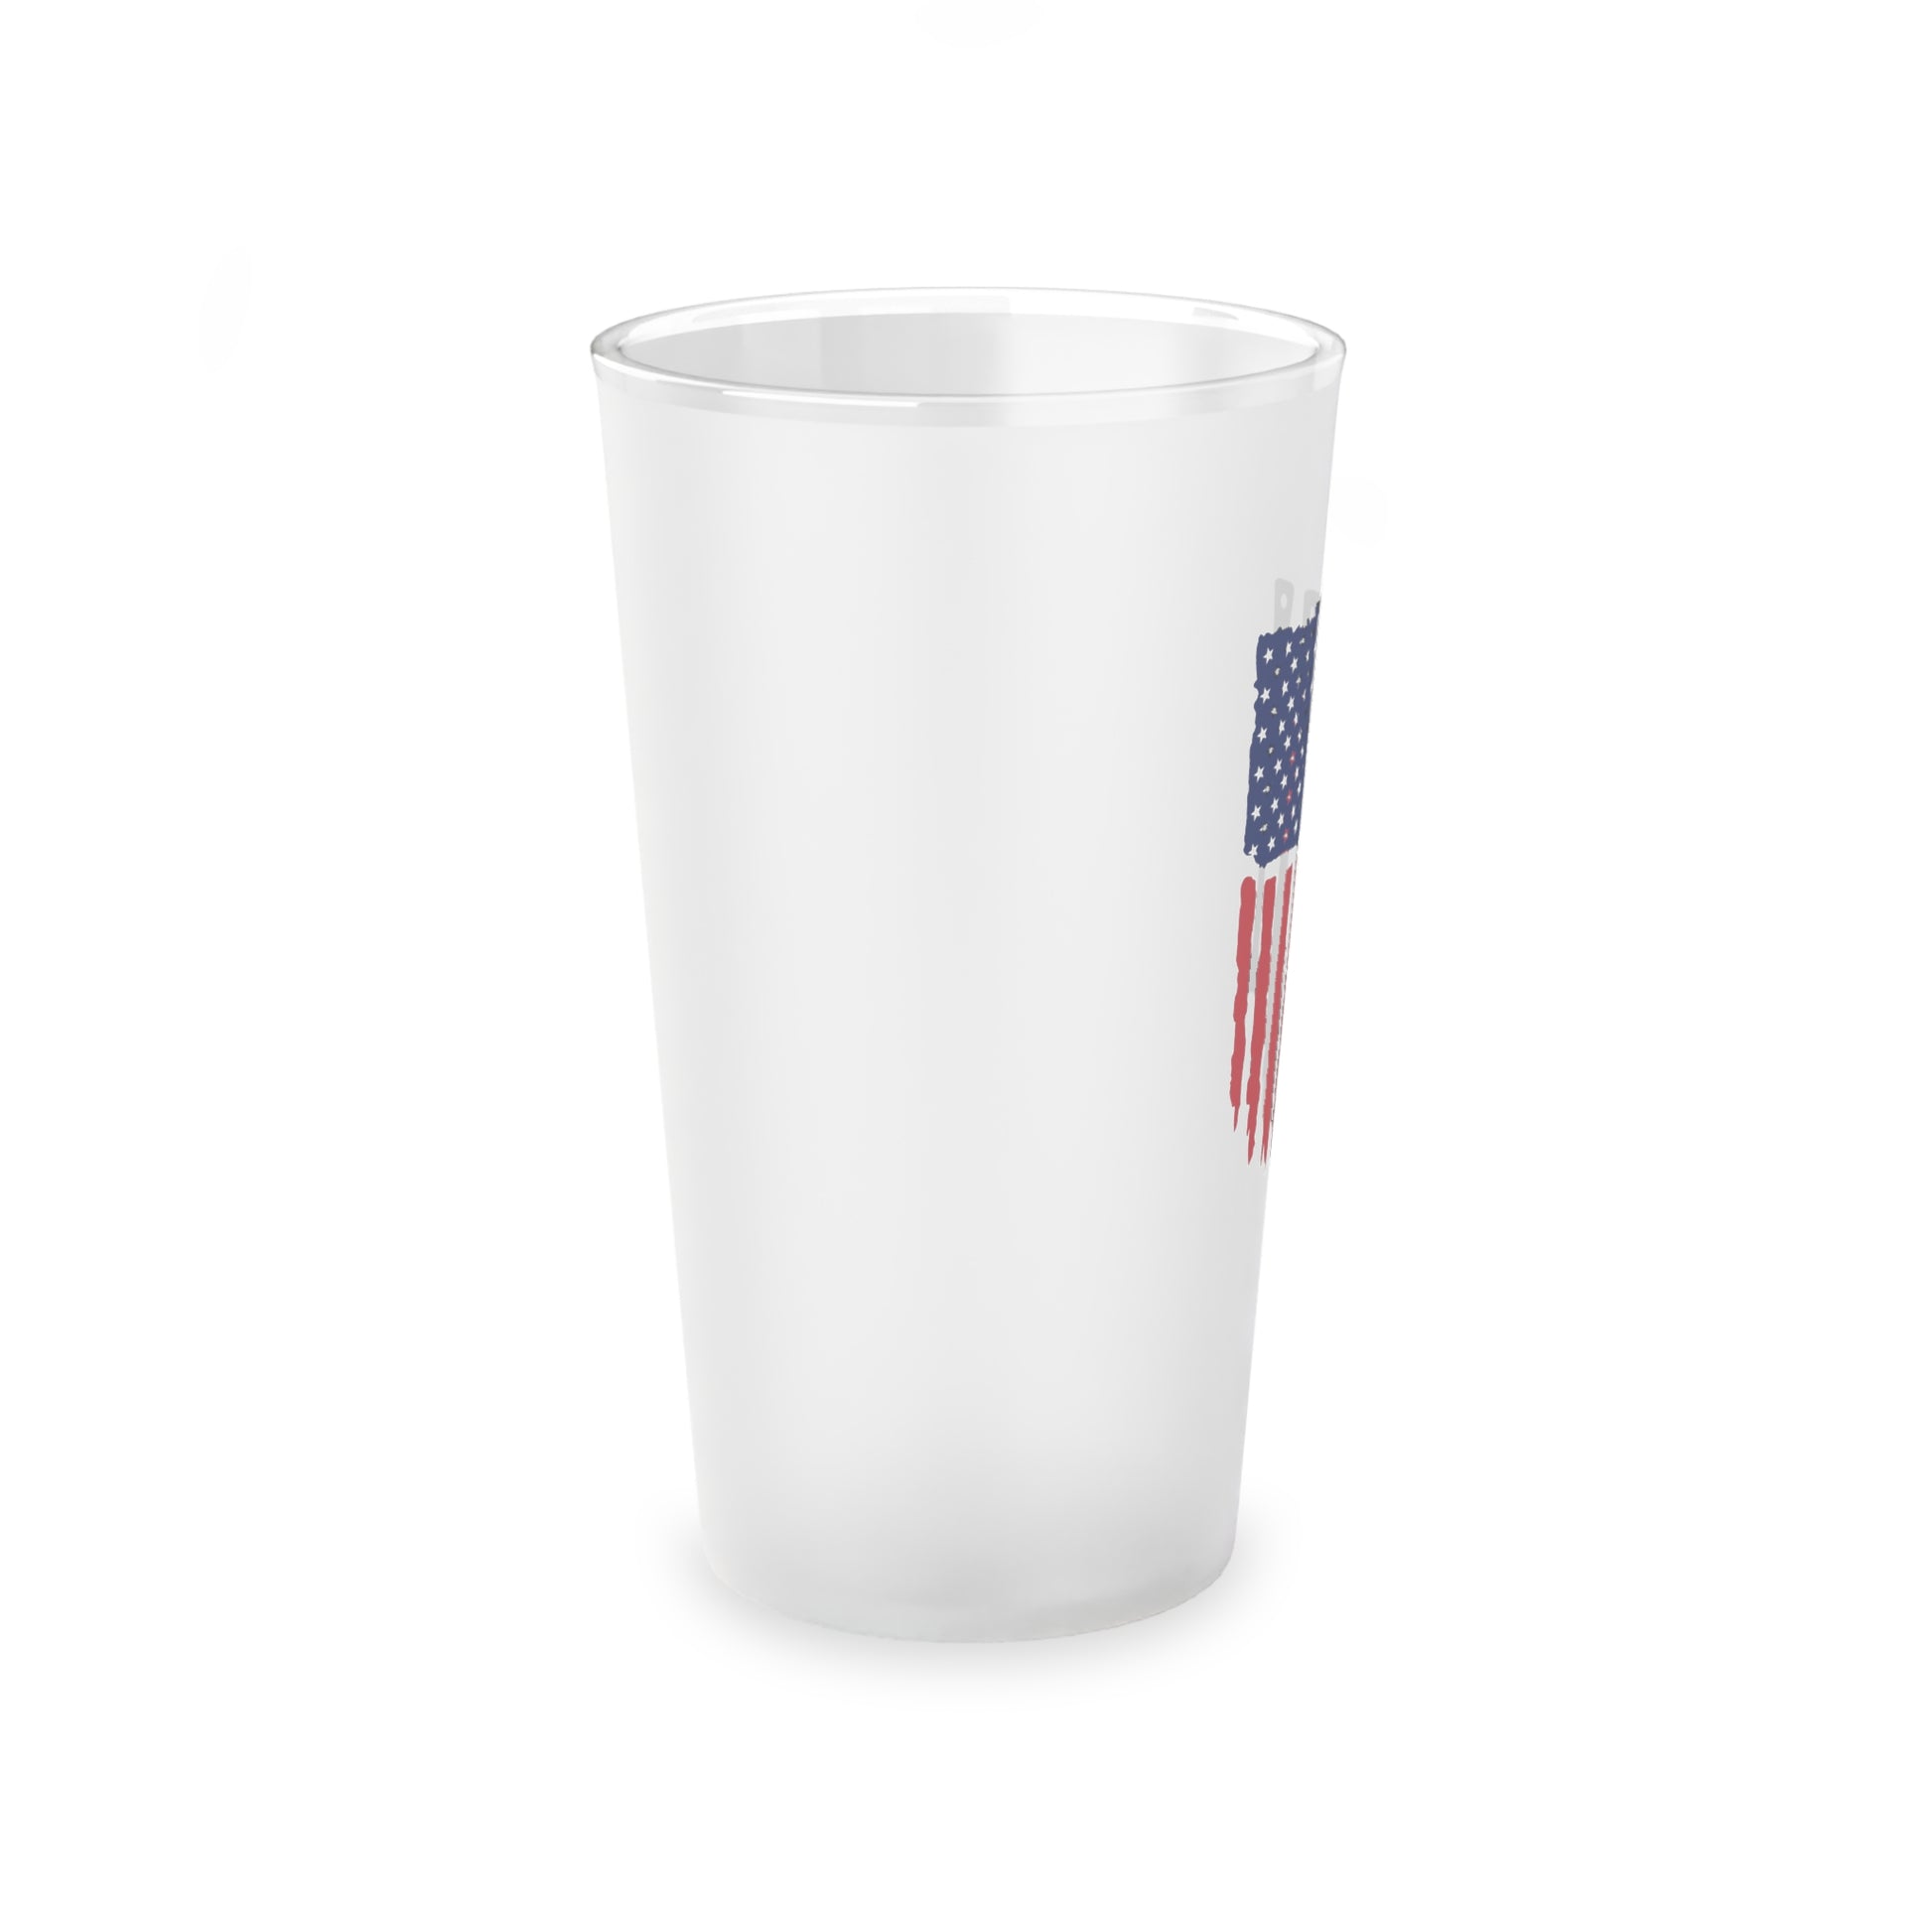 "American Cook Out" Glass Mug - Weave Got Gifts - Unique Gifts You Won’t Find Anywhere Else!